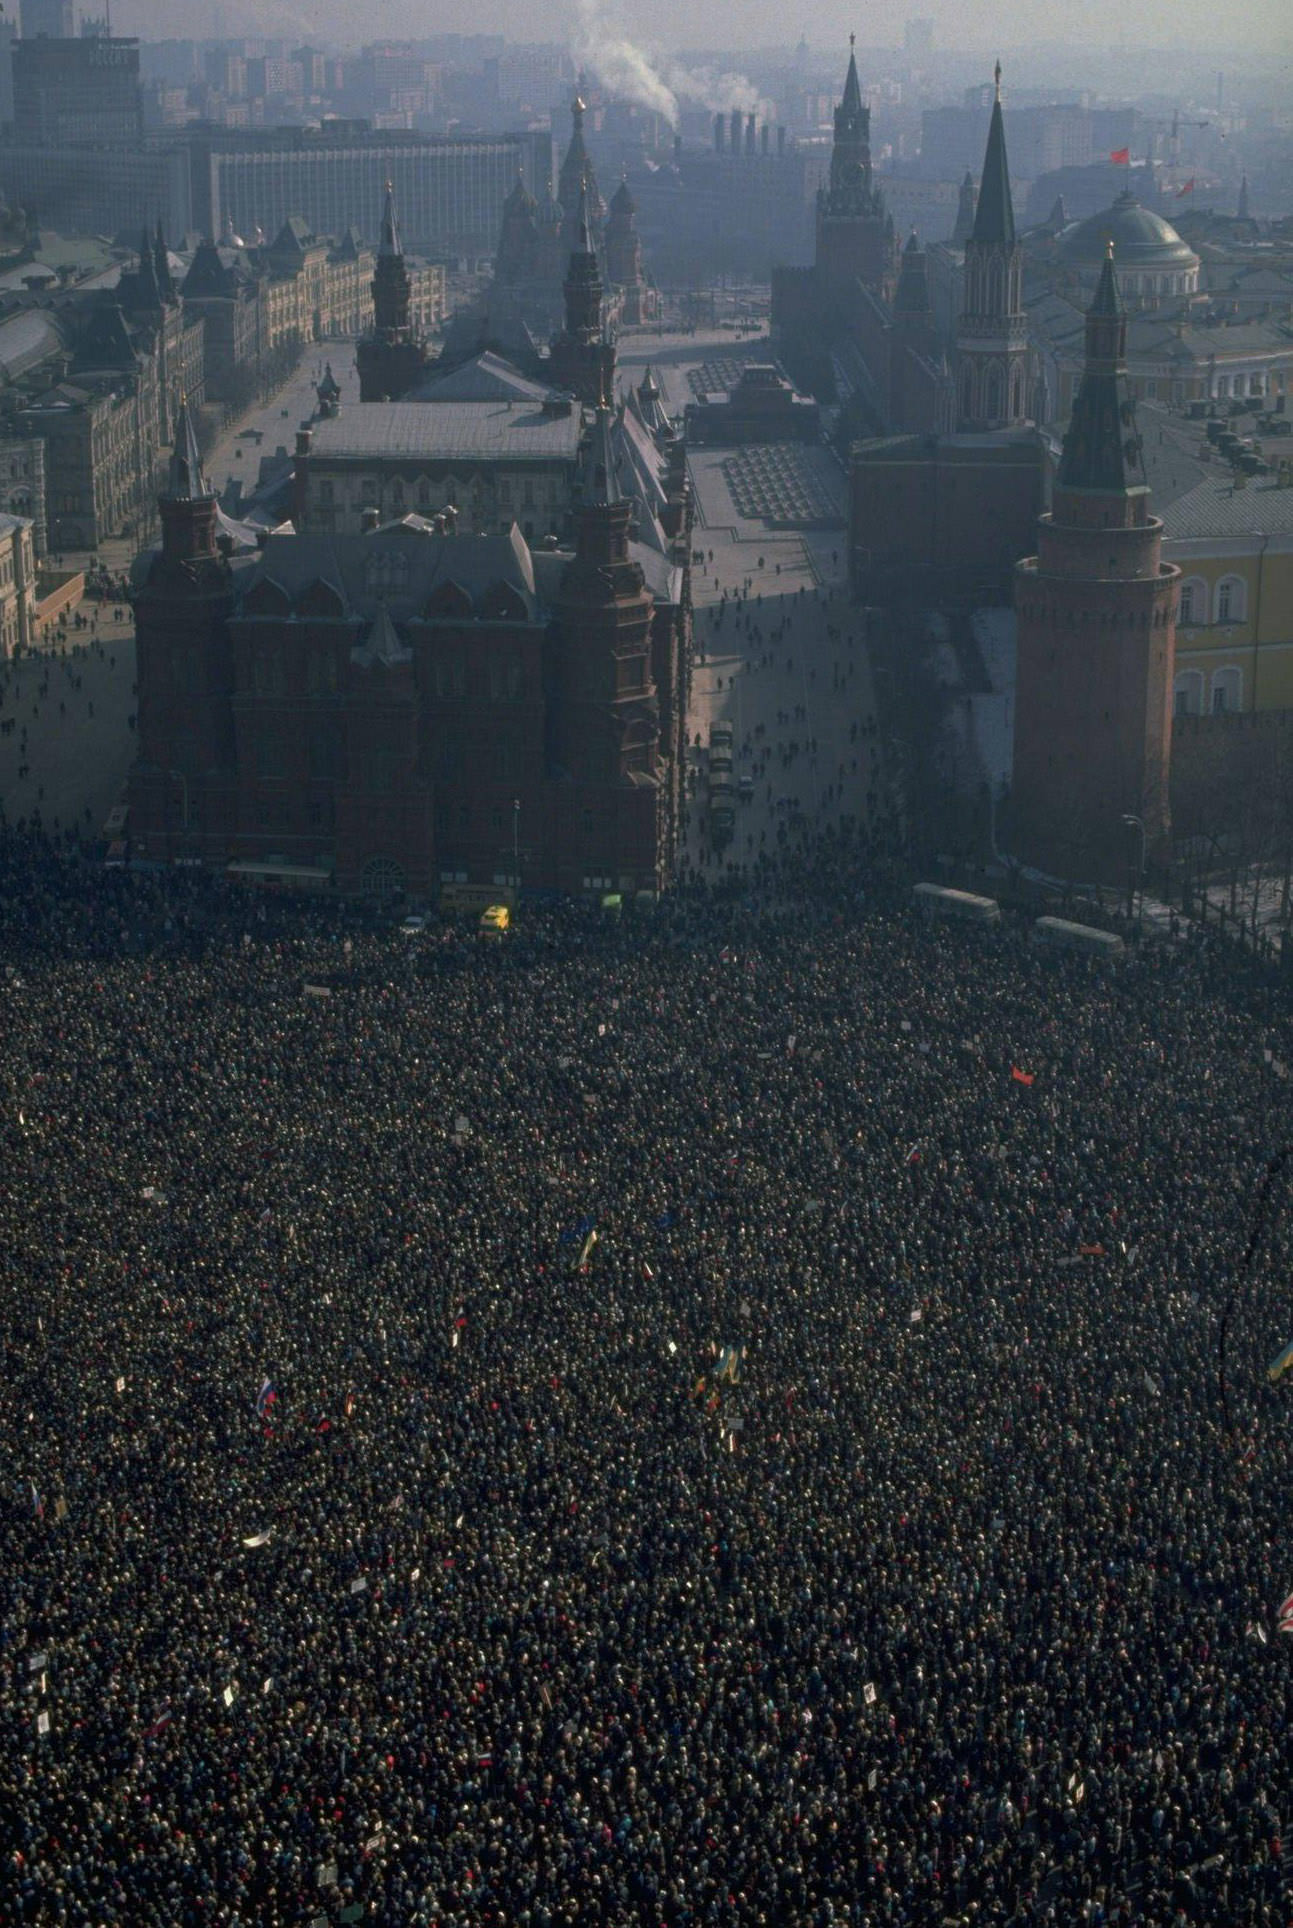 Sea of pro-democracy protestors fill Red Square by Kremlin demonstrating for reform.